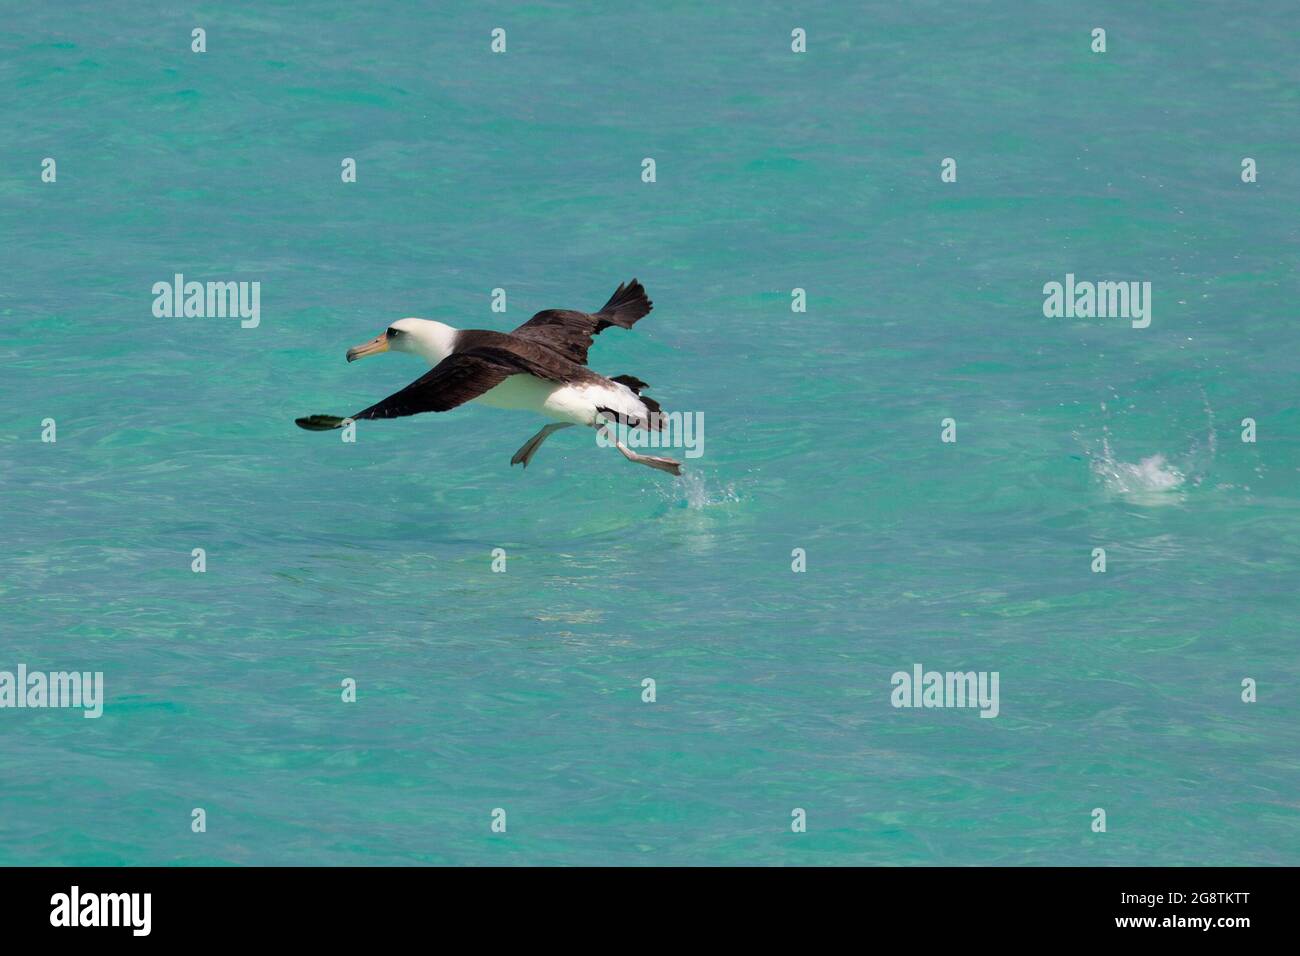 Laysan Albatross running along the water surface during takeoff in Papahanaumokuakea Marine National Monument, North Pacific Ocean Stock Photo